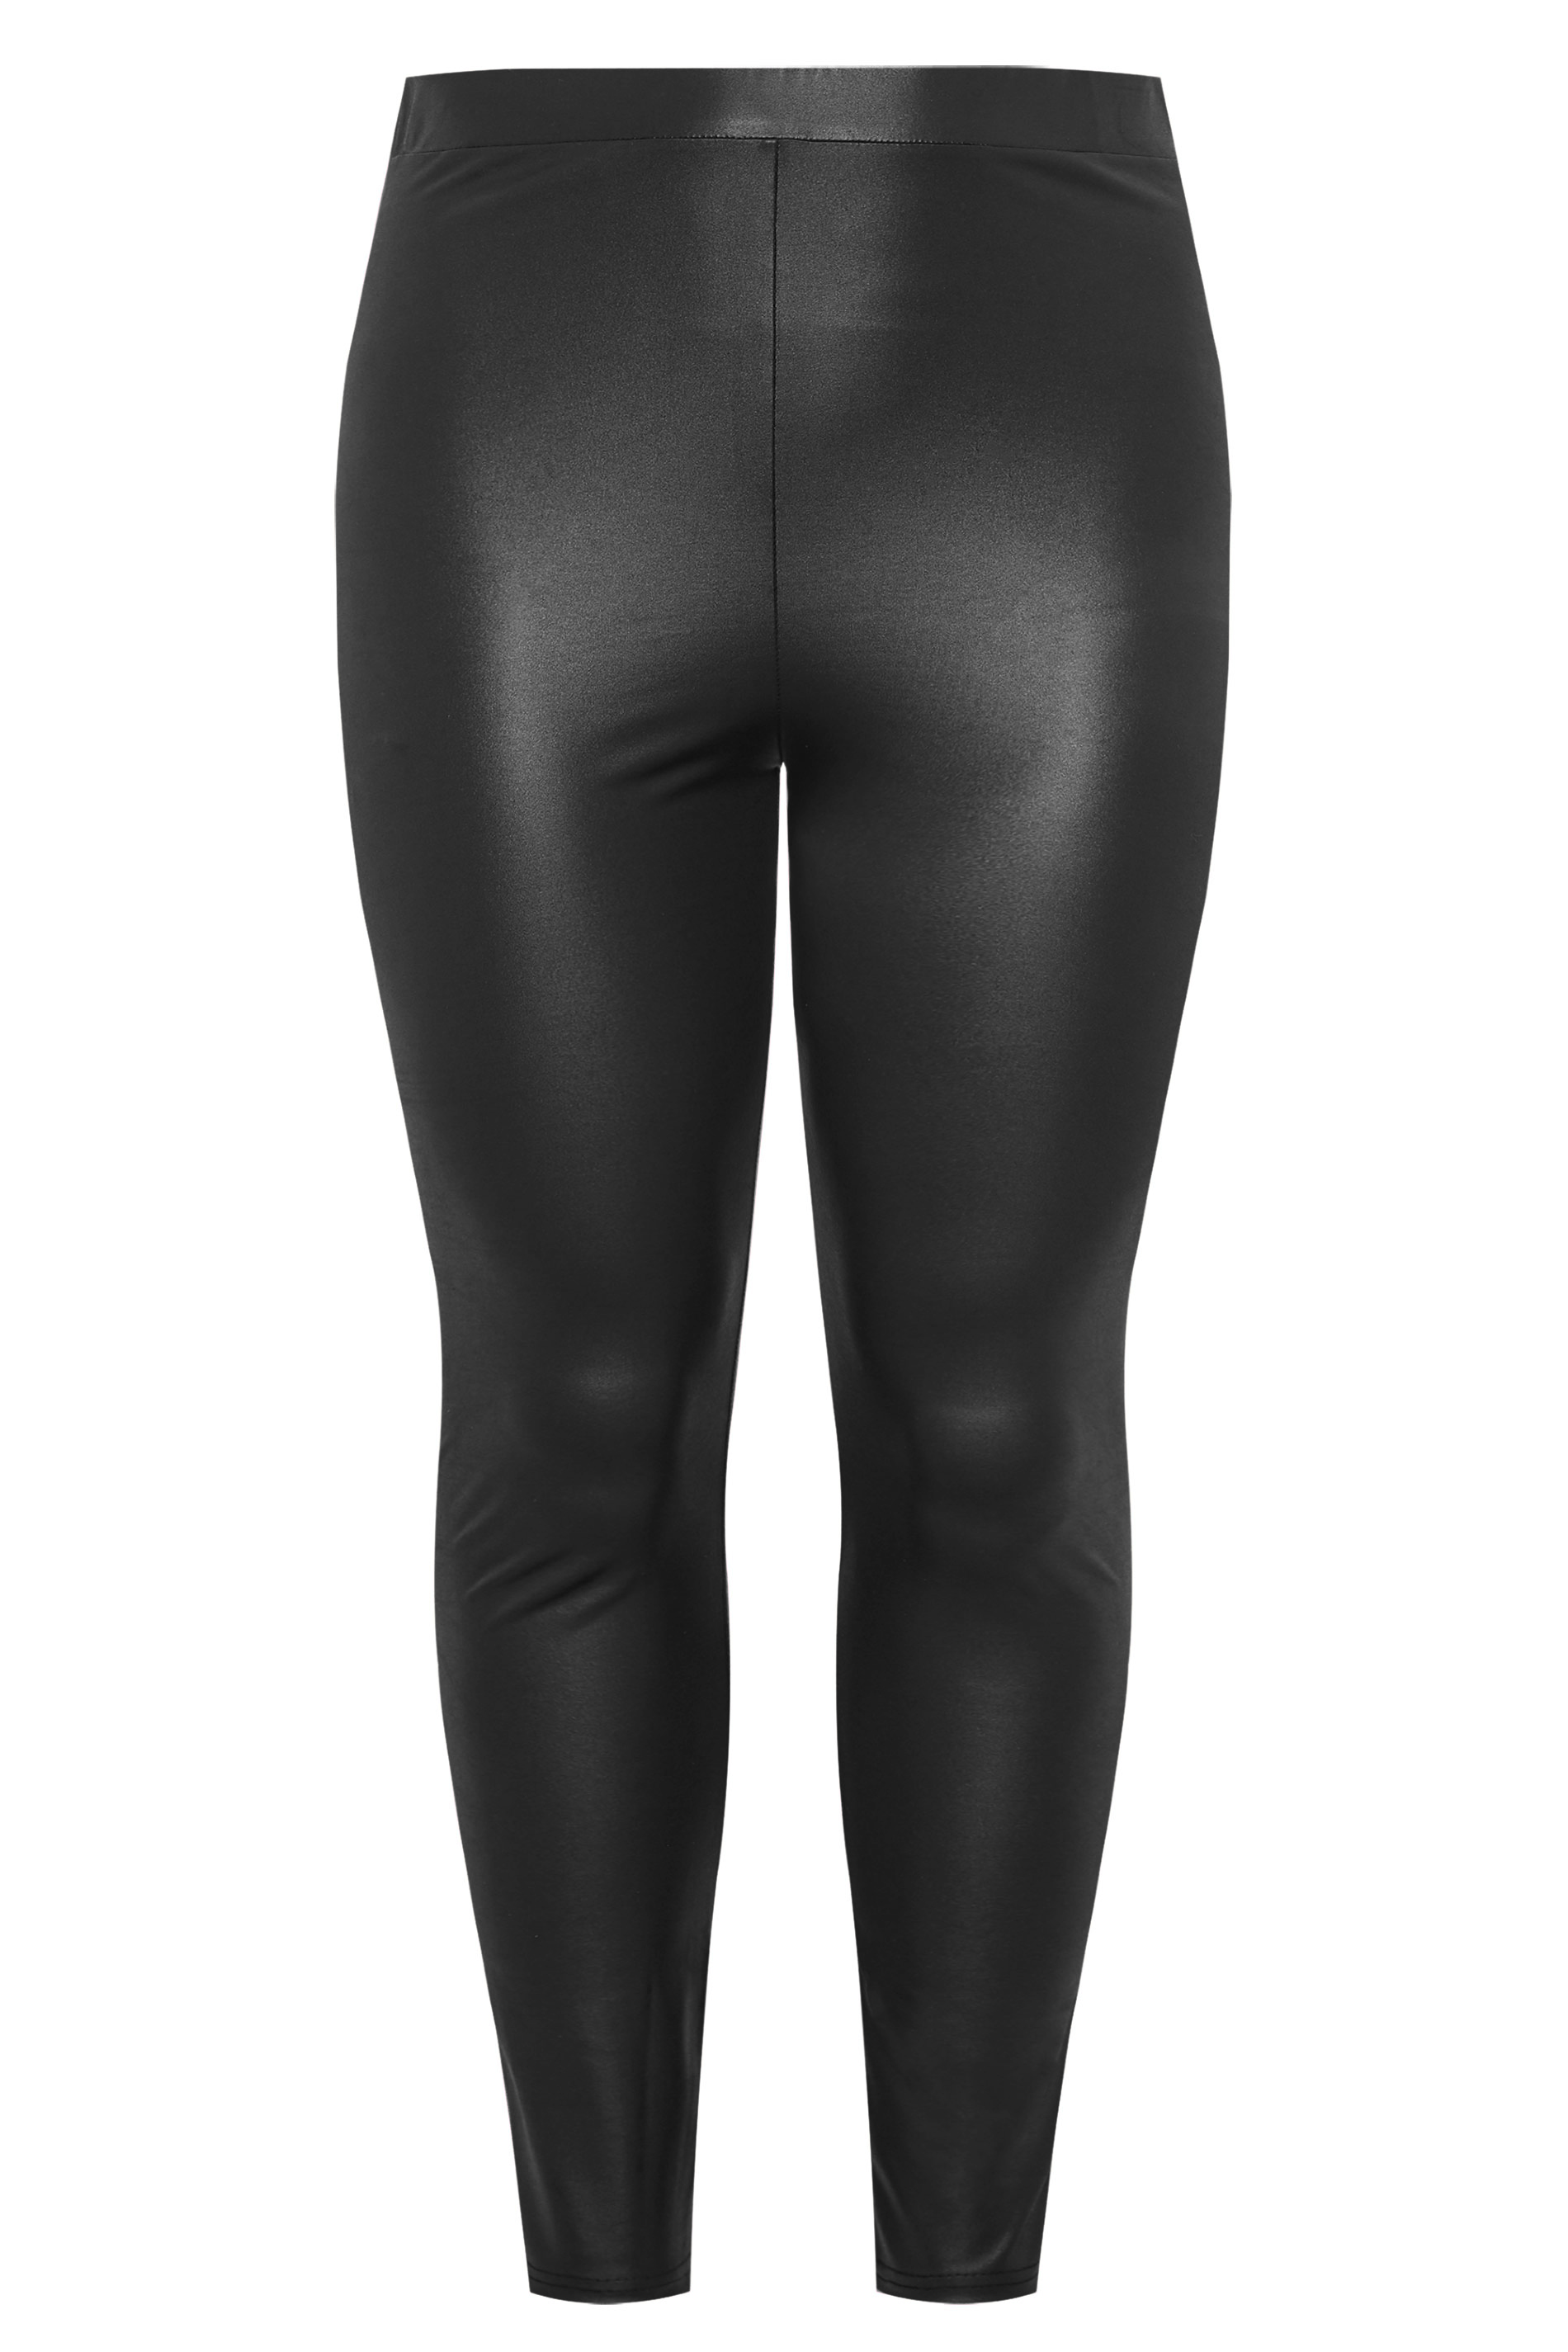 Sexy Black Long Maternity Leather Leggings For Women Thin, Plus Size  Bottoms, Hot Sale! From Boniee, $19.84 | DHgate.Com